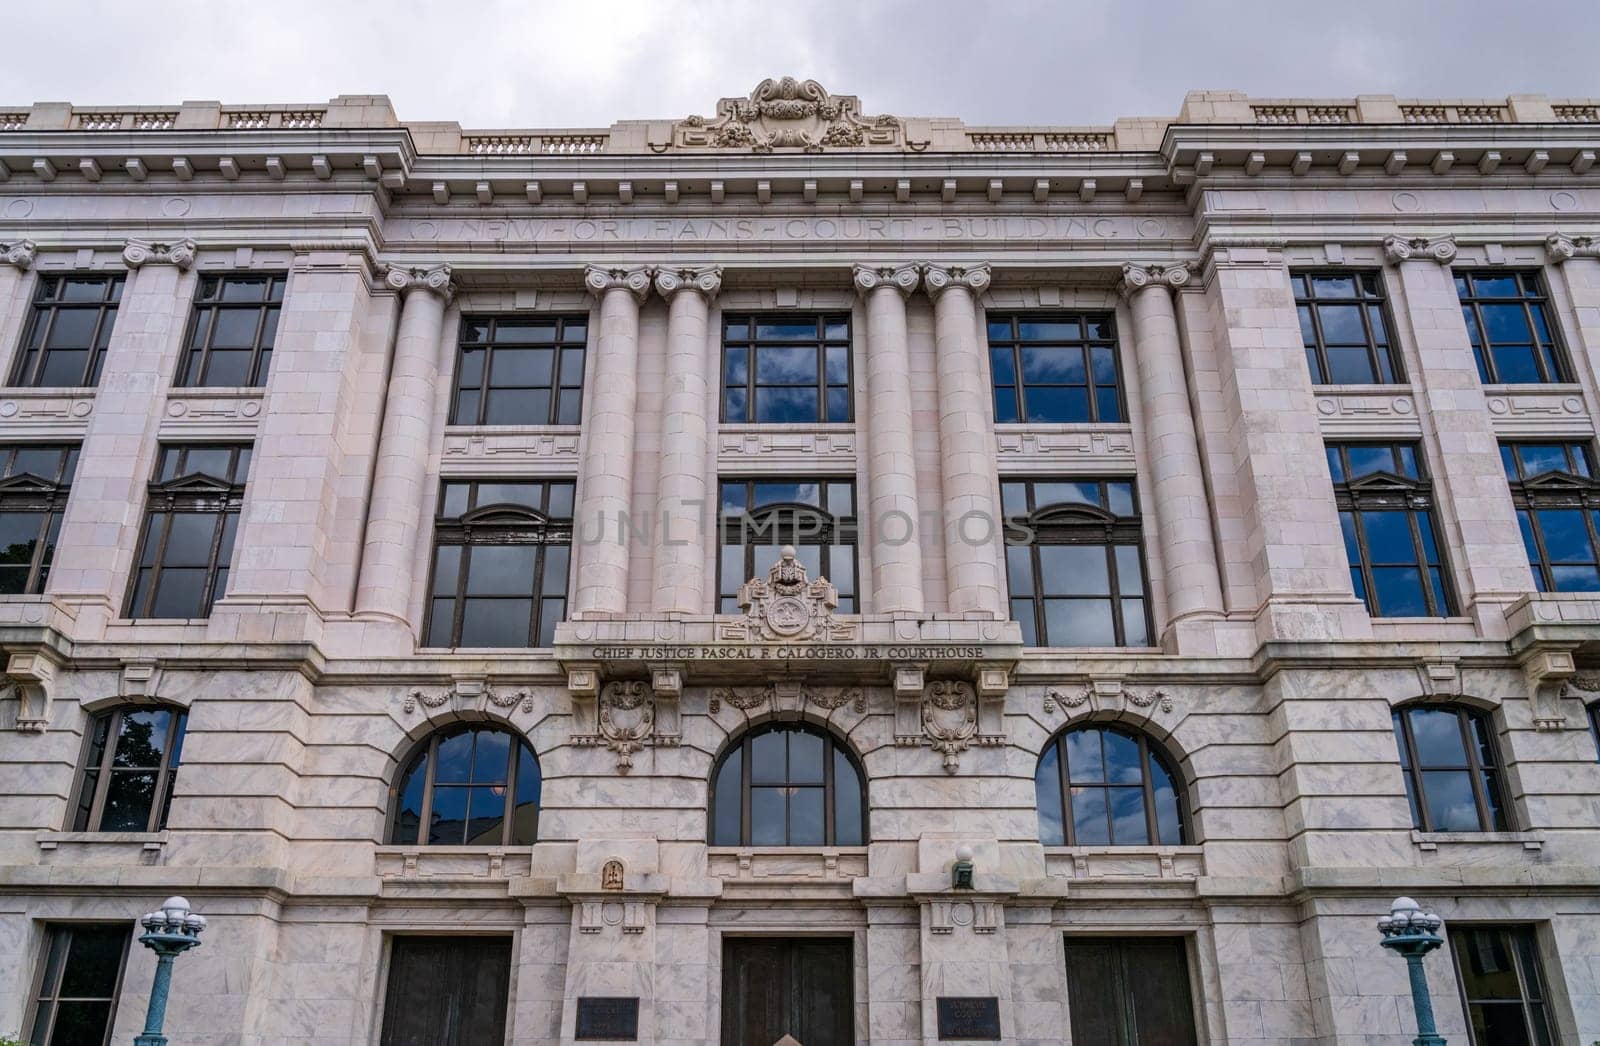 Facade of Louisiana Supreme Court Courthouse in New Orleans by steheap